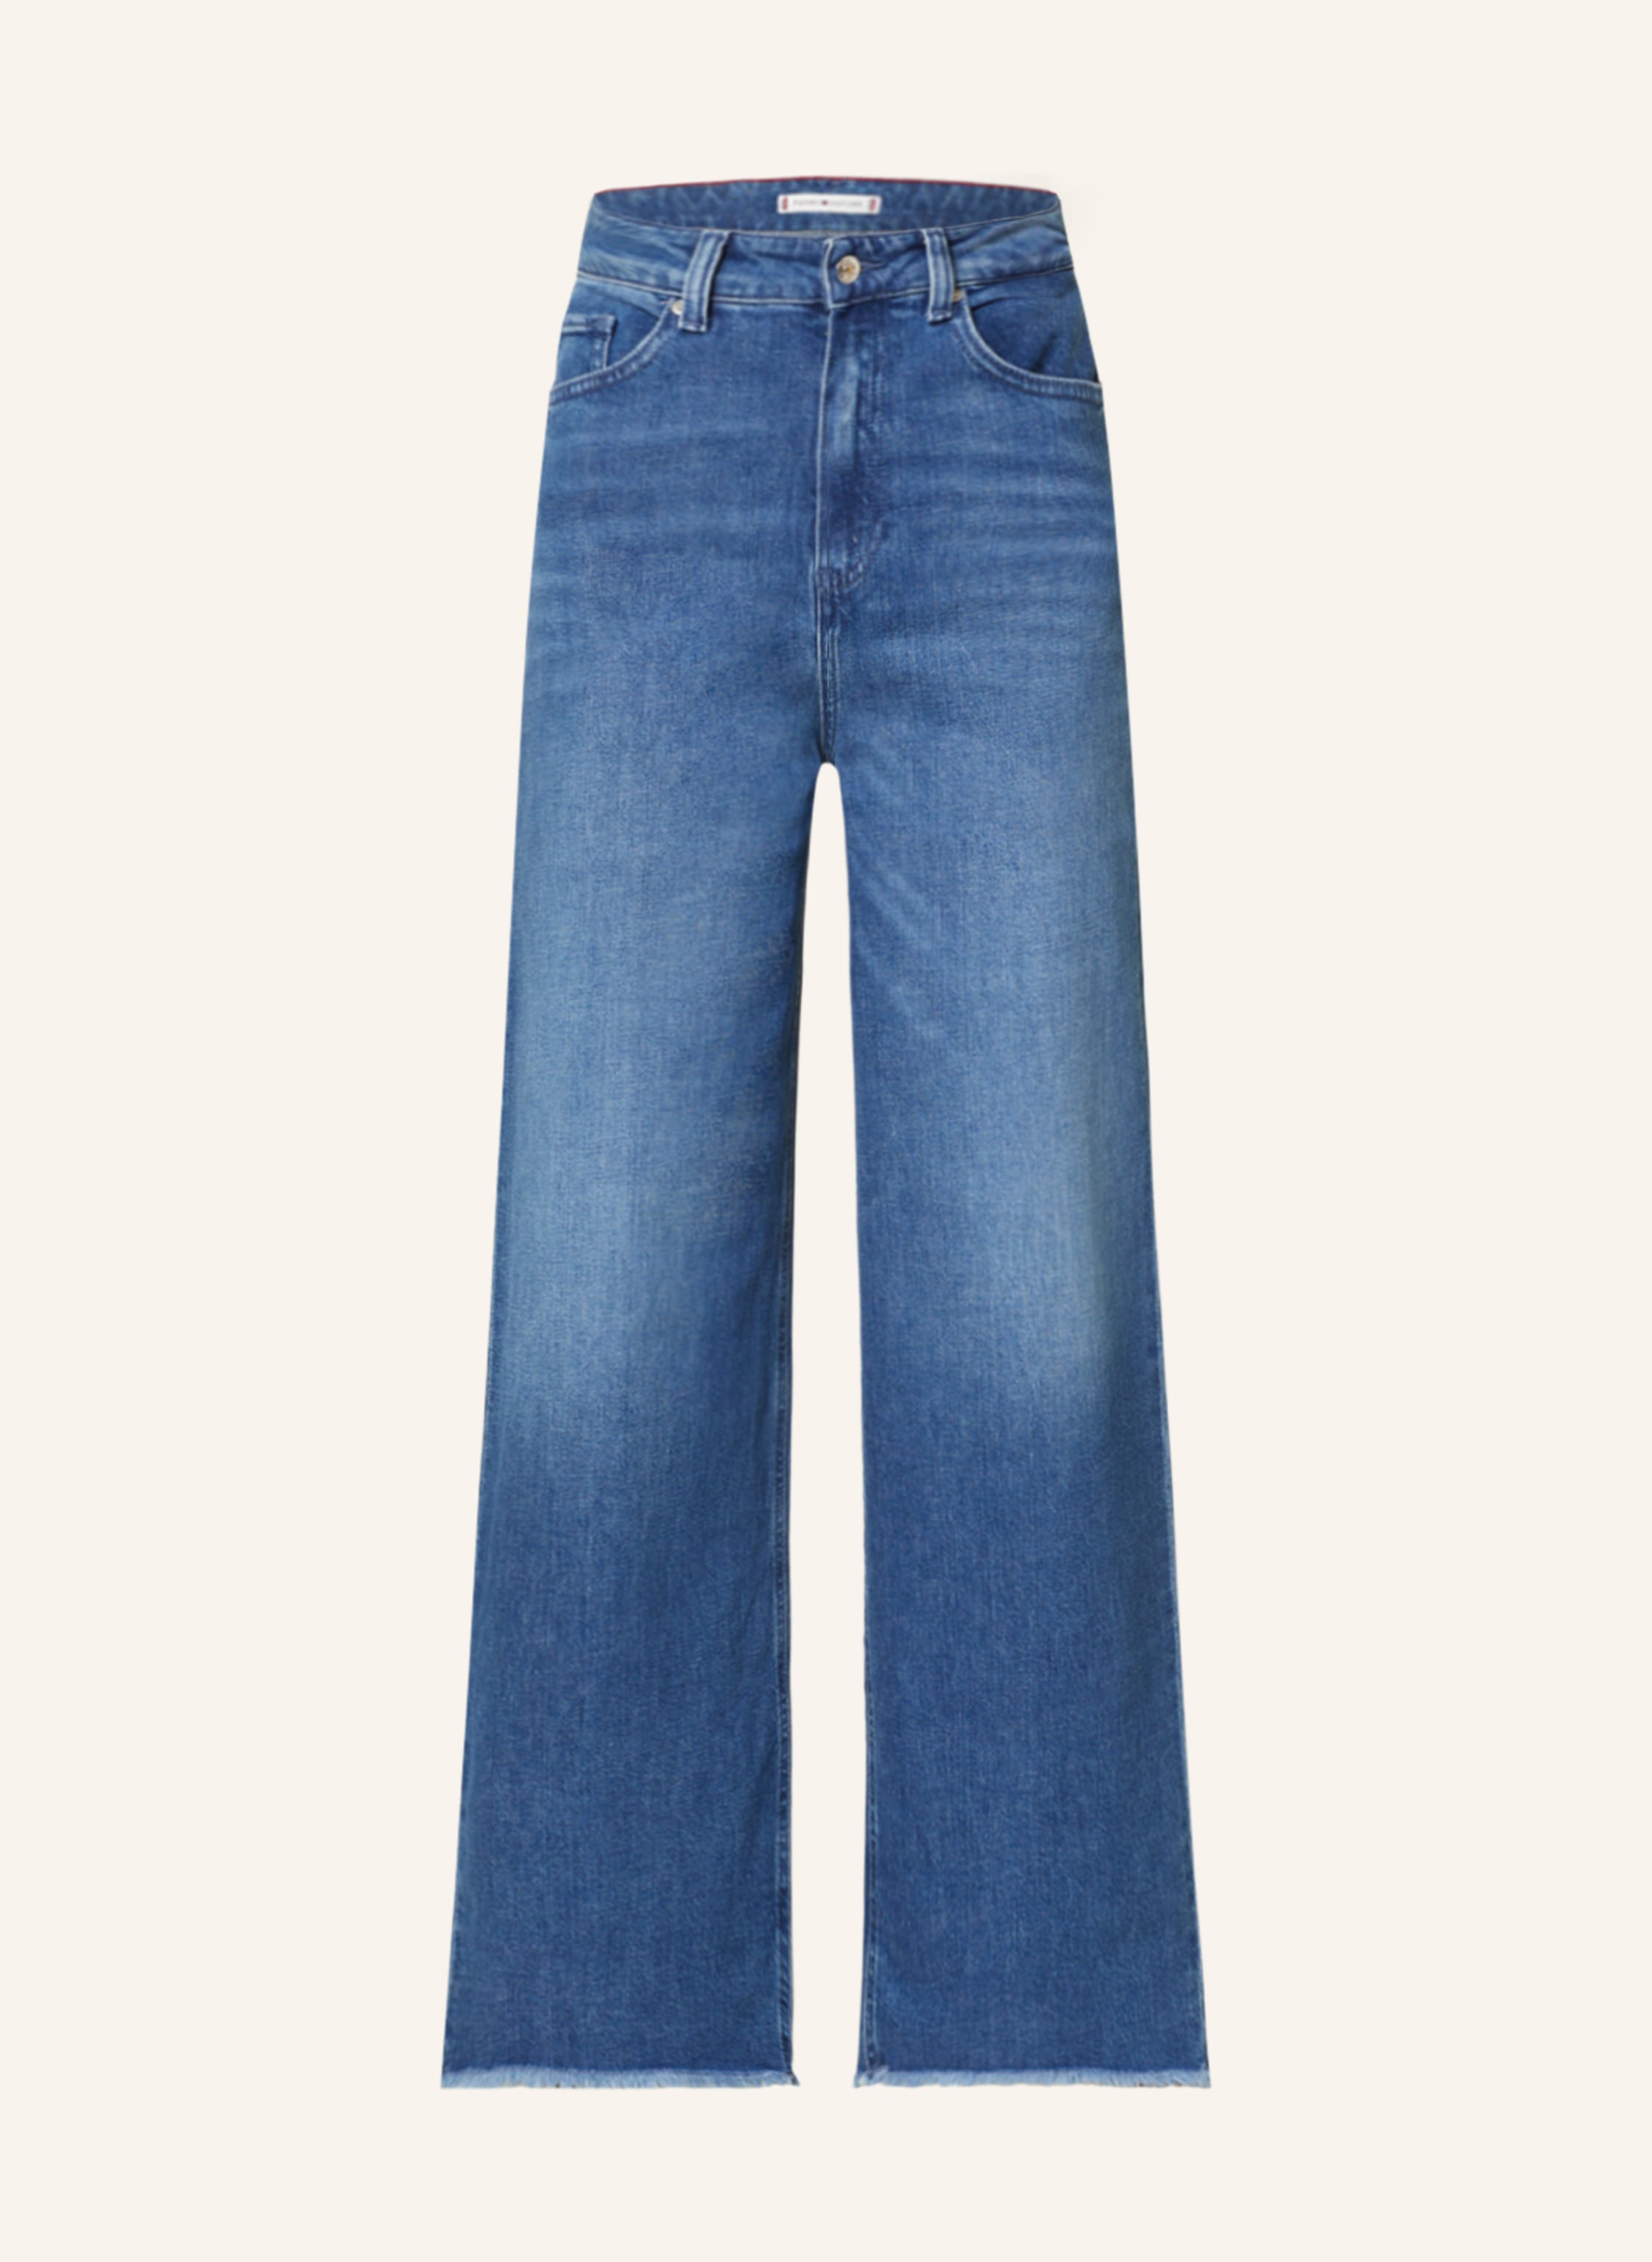 TOMMY HILFIGER Straight Jeans in 1a6 suki